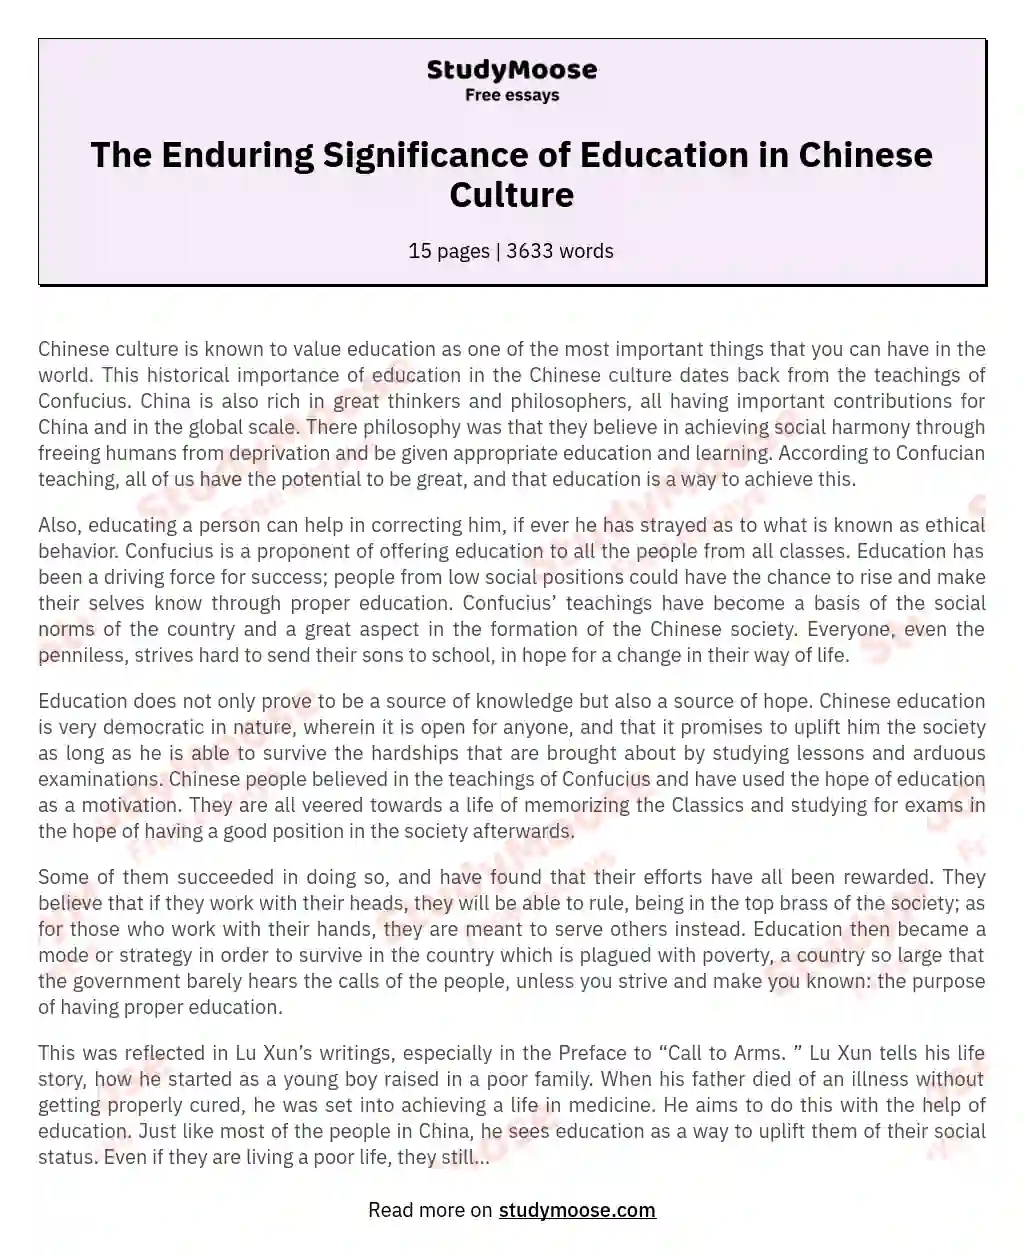 The Enduring Significance of Education in Chinese Culture essay